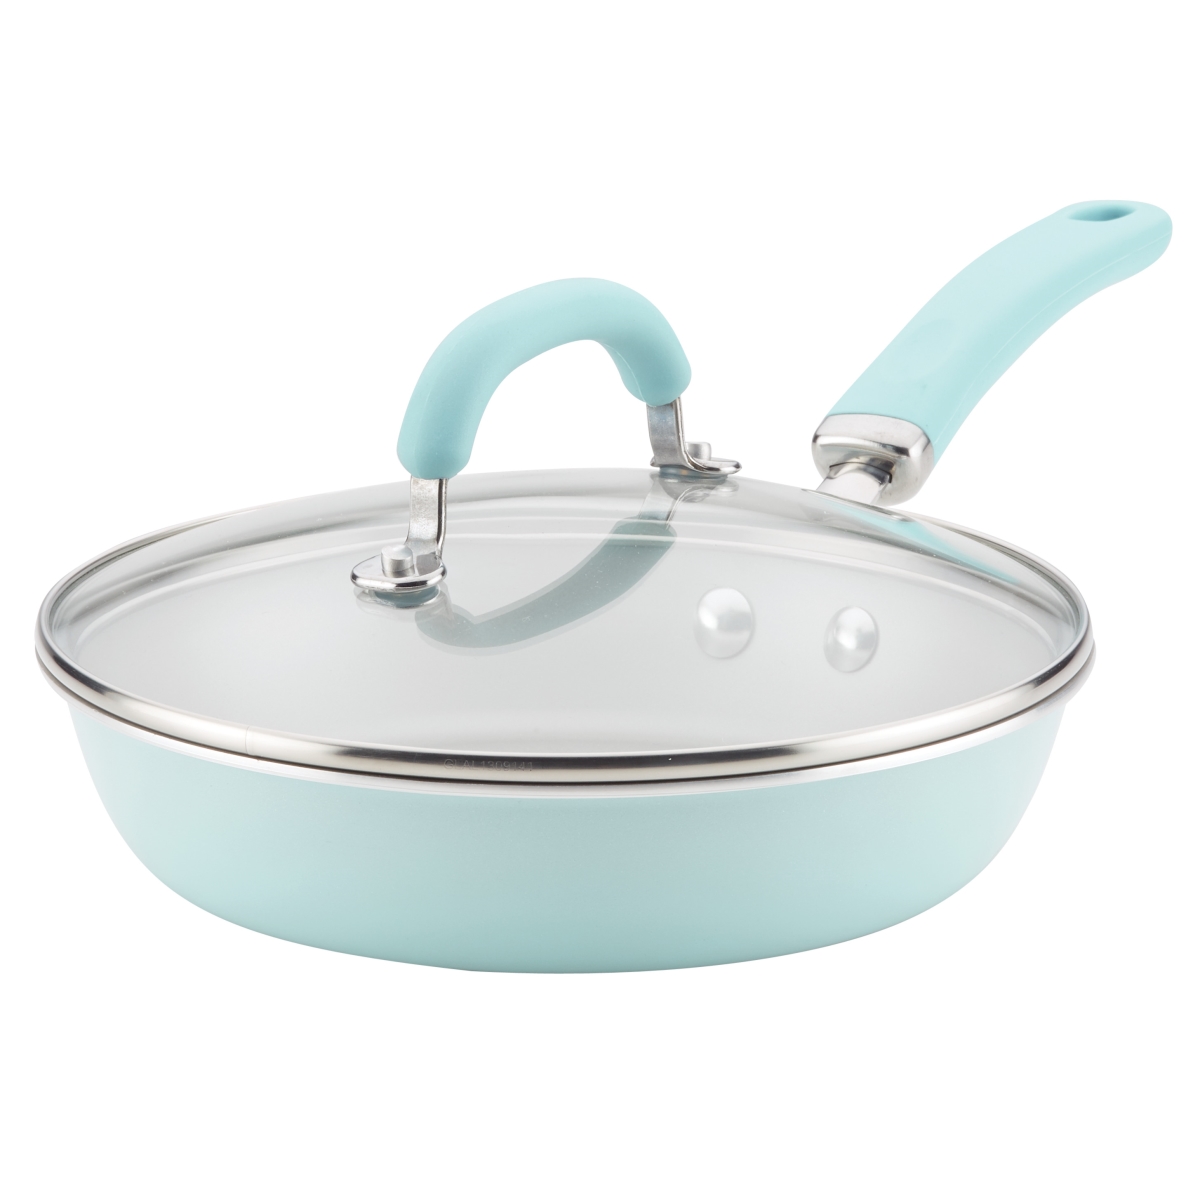 12017 Create Delicious Aluminum Nonstick Covered Deep Skillet, 9.5 In. - Light Blue Shimmer